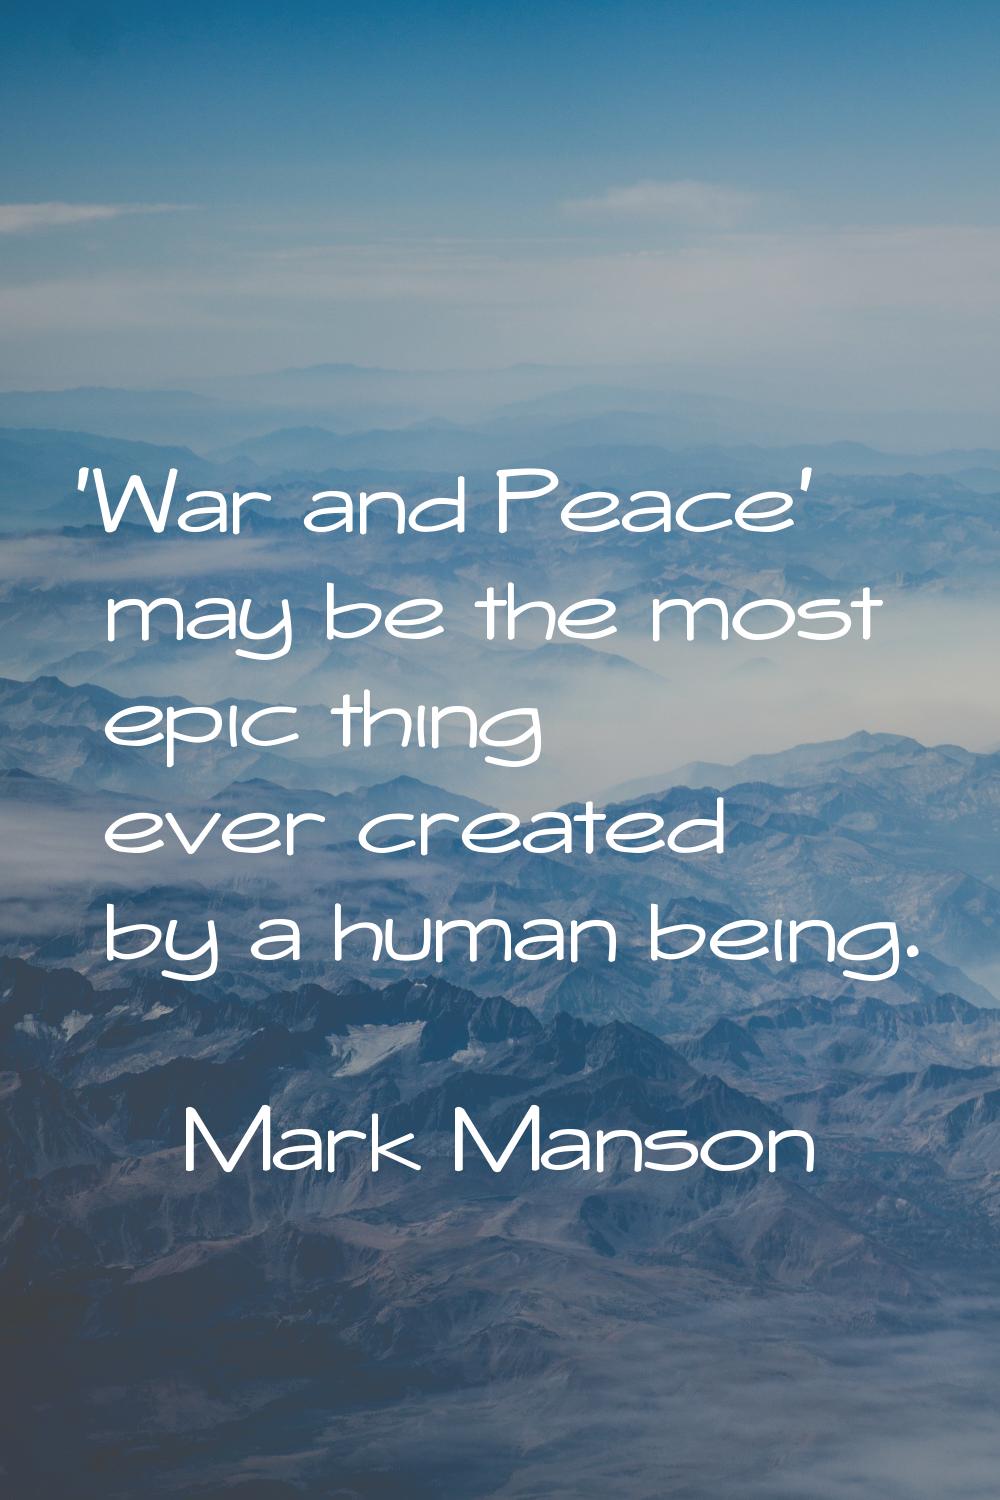 'War and Peace' may be the most epic thing ever created by a human being.